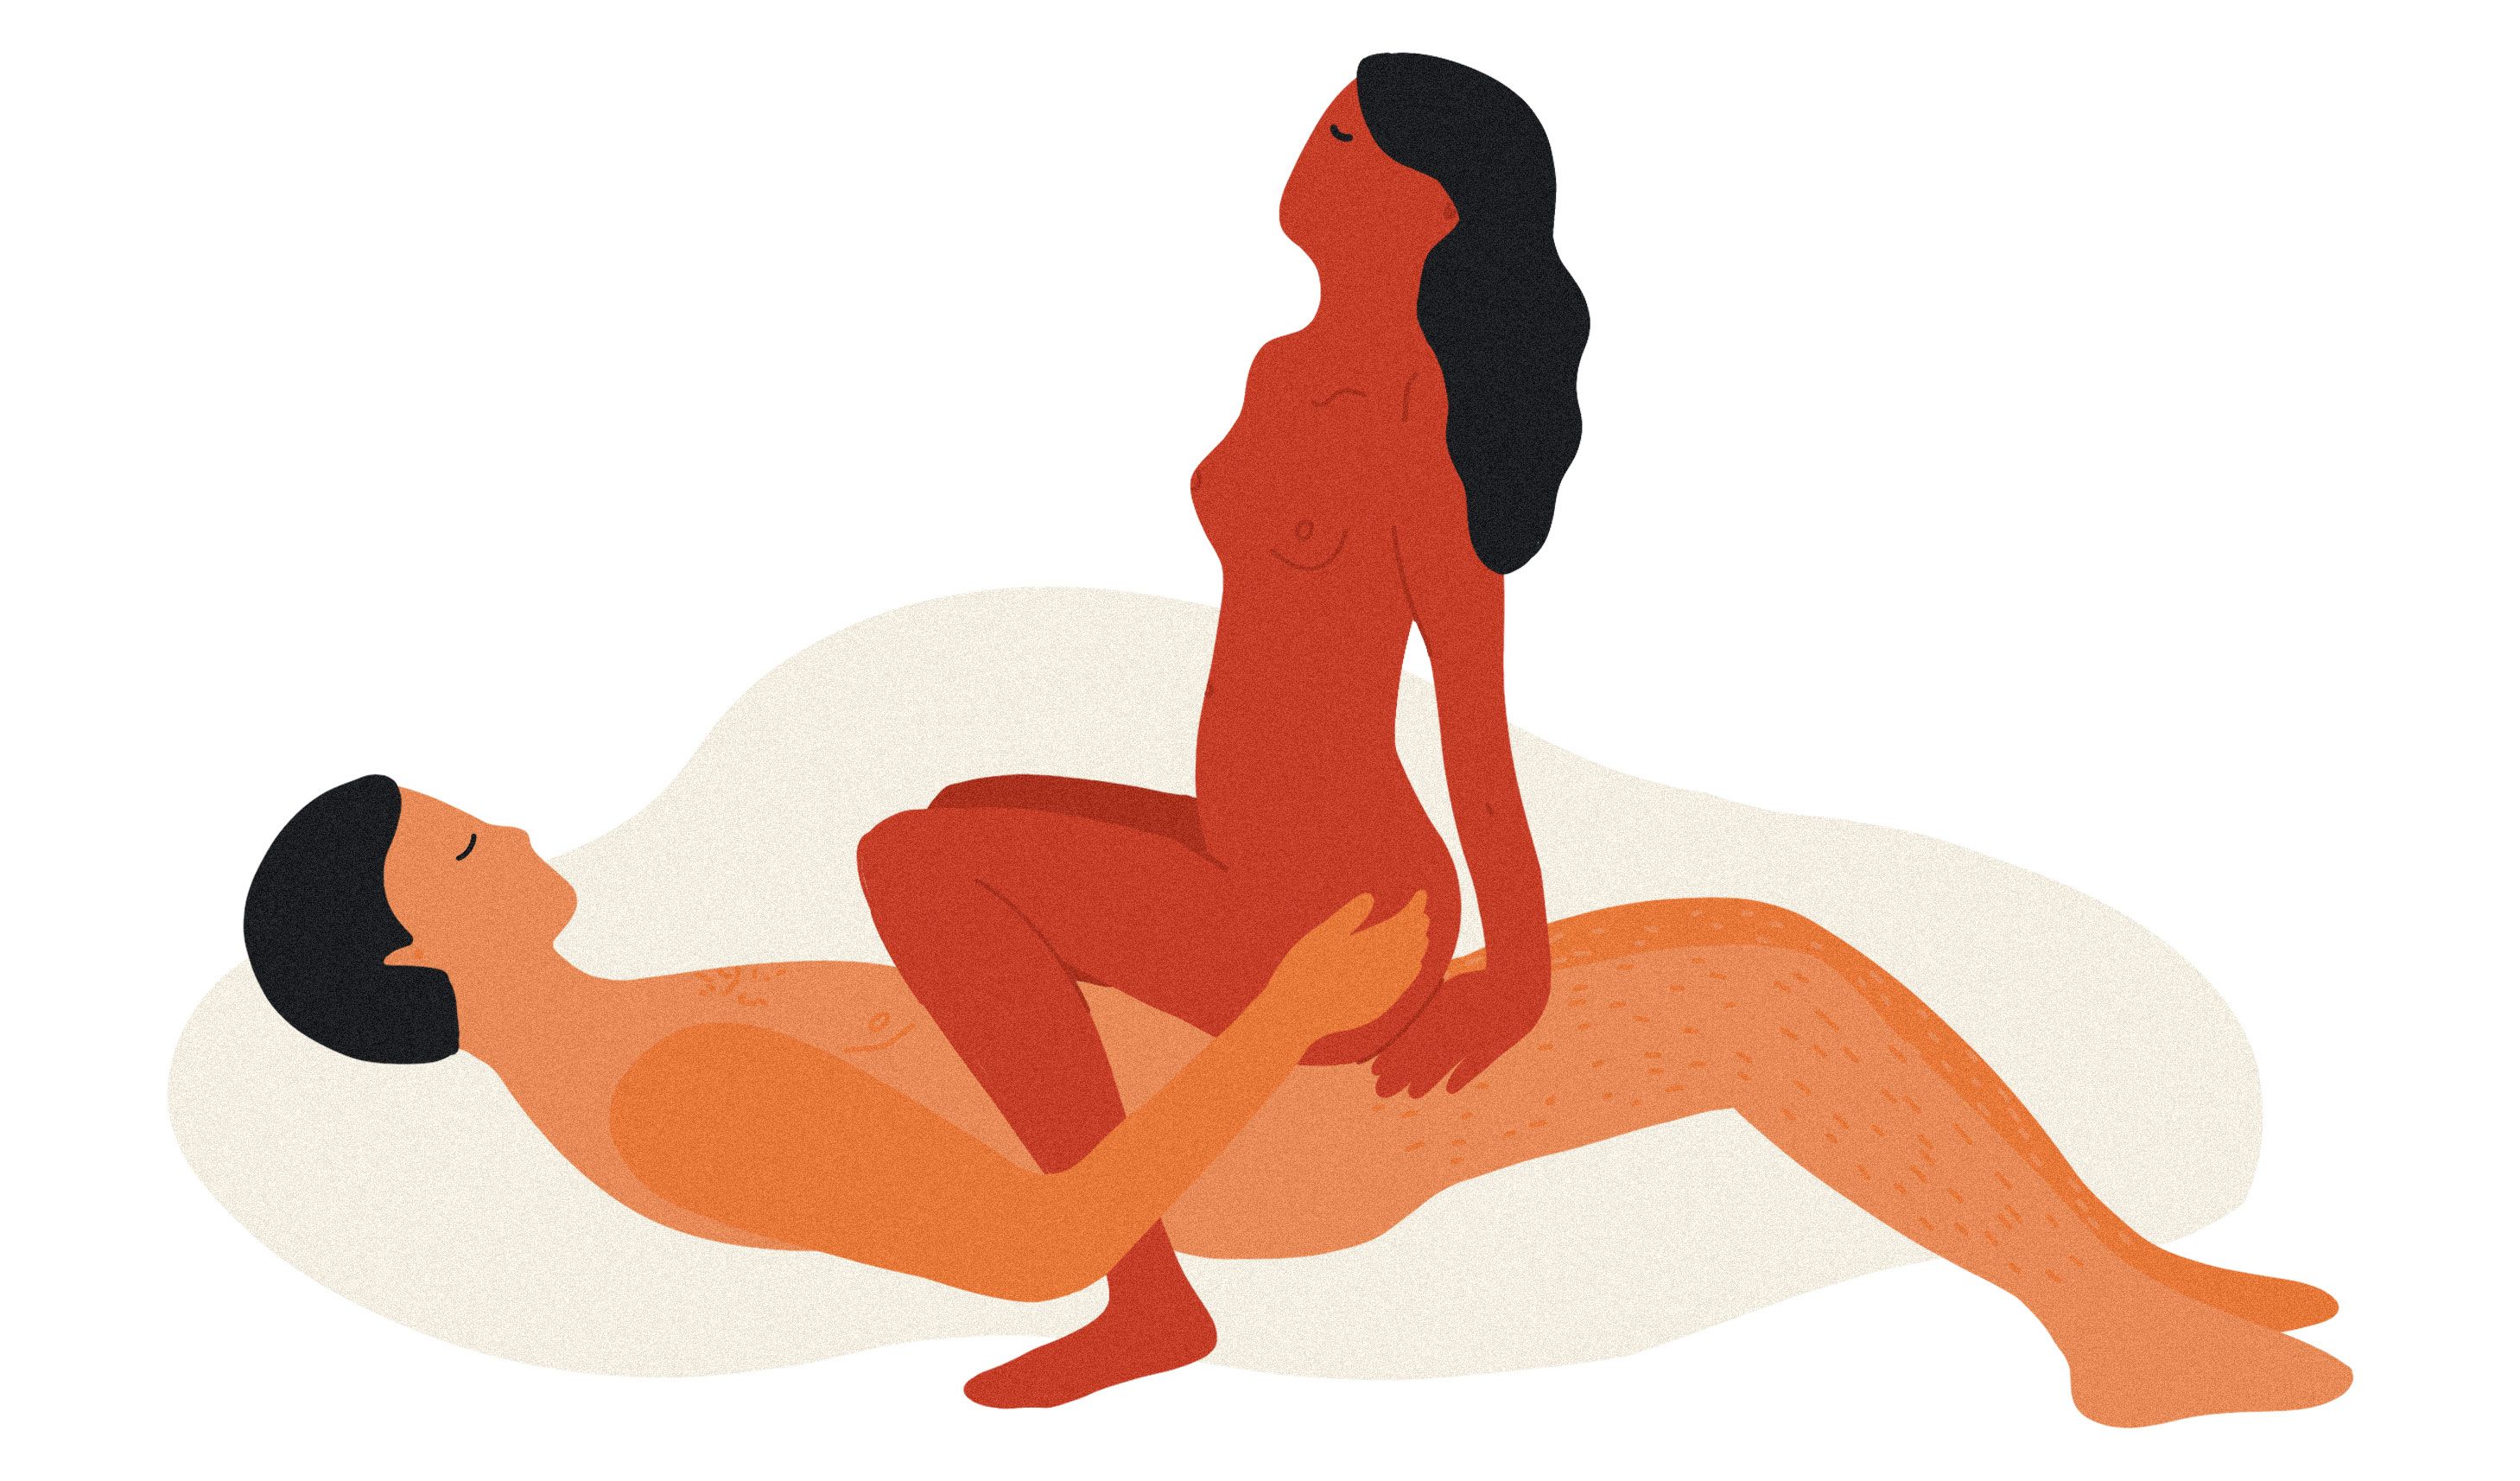 Best Positions For Anal Sex